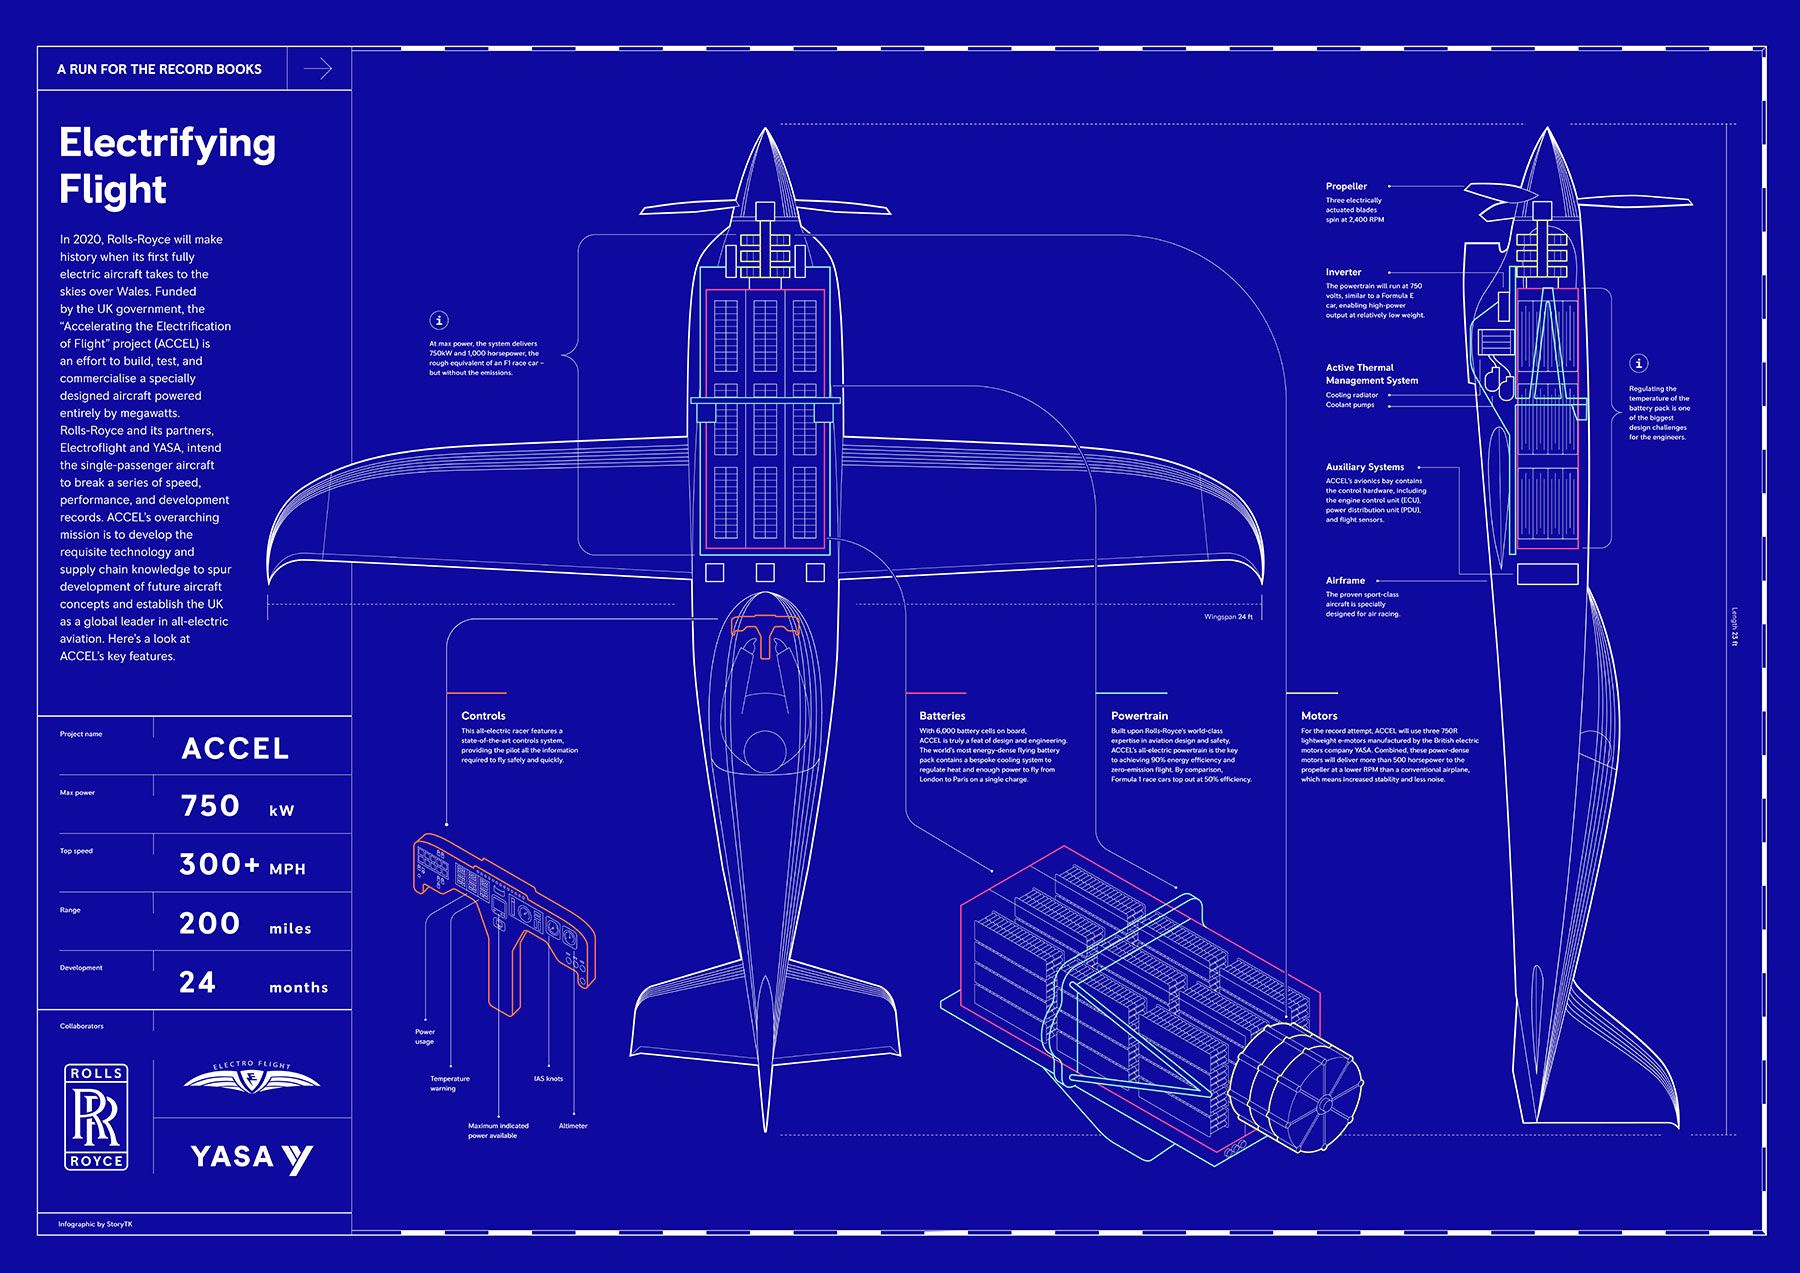 Technical illustration describing how the Rolls Royce ACCEL plane works